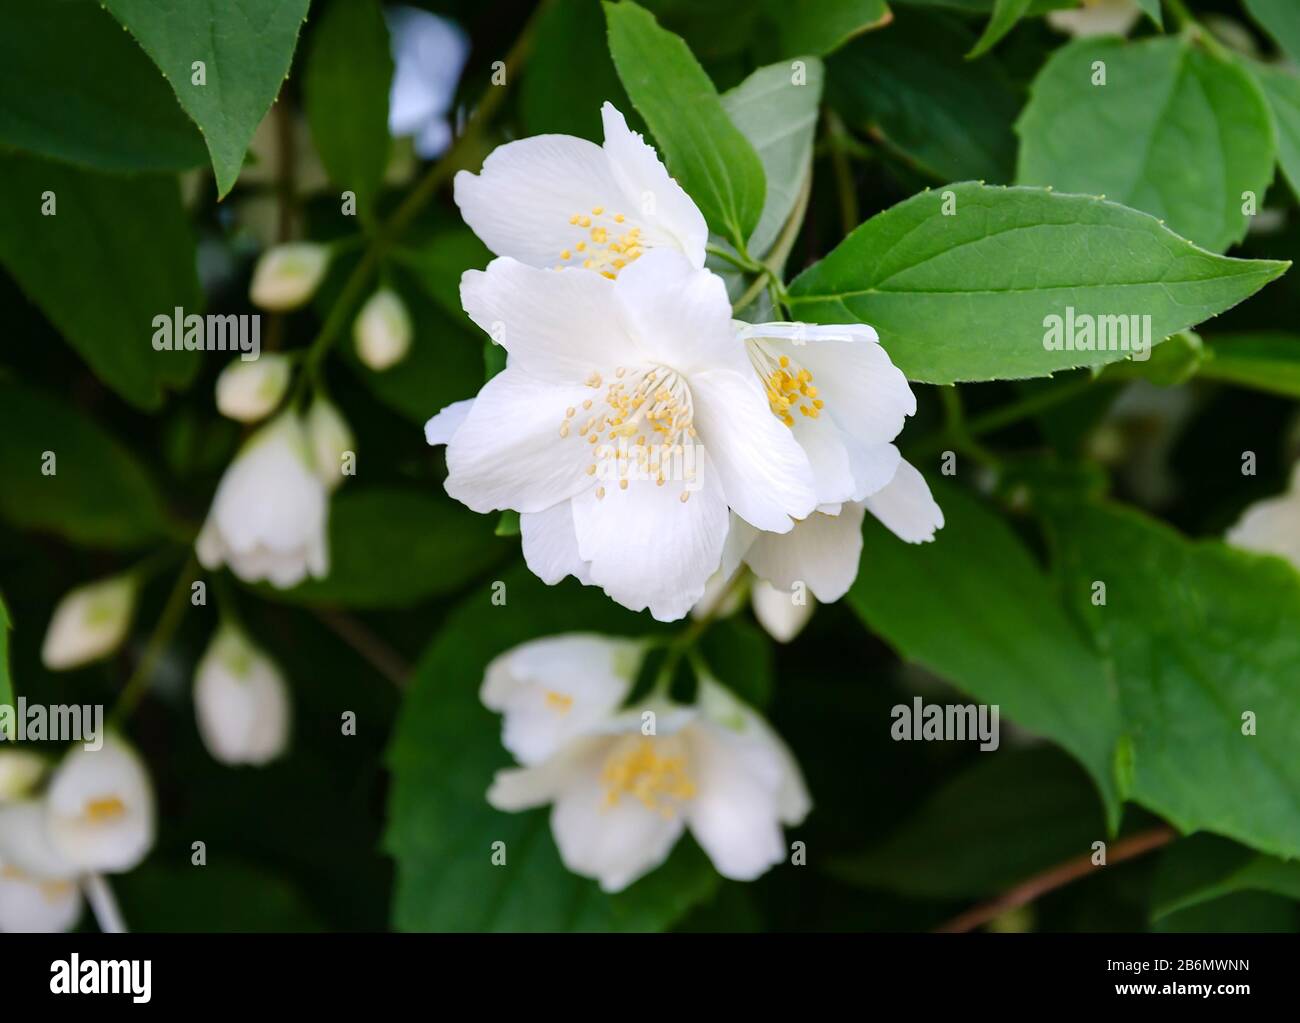 jasmine blooms with white flowers, on a warm day in the garden, beautiful background, close-up Stock Photo